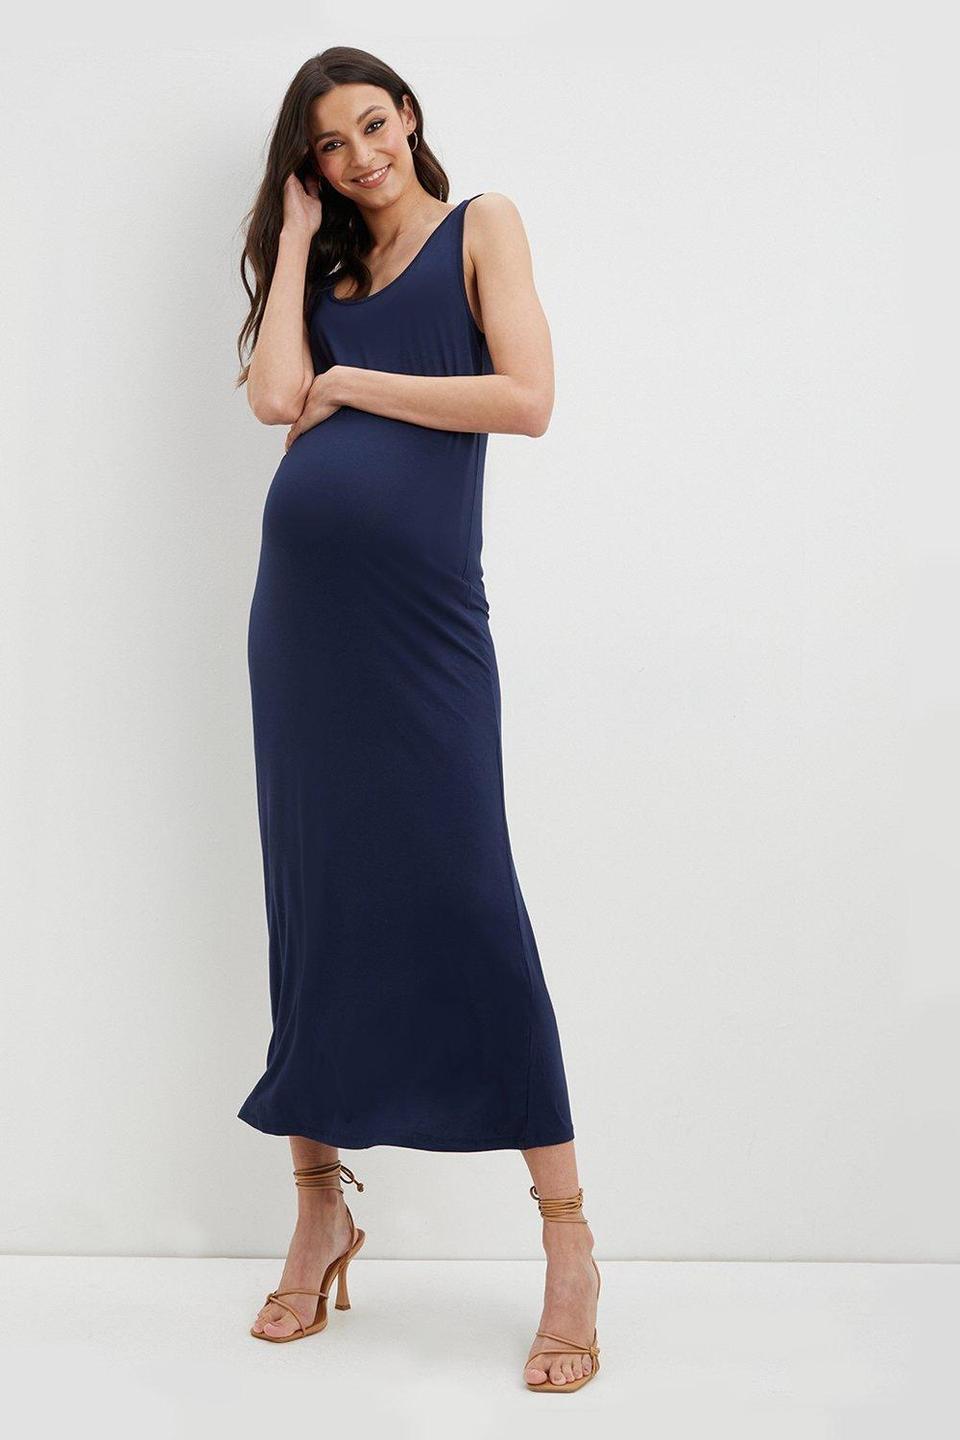 31 Best Maternity Bridesmaid Dresses for Pregnant Bridesmaids - hitched ...